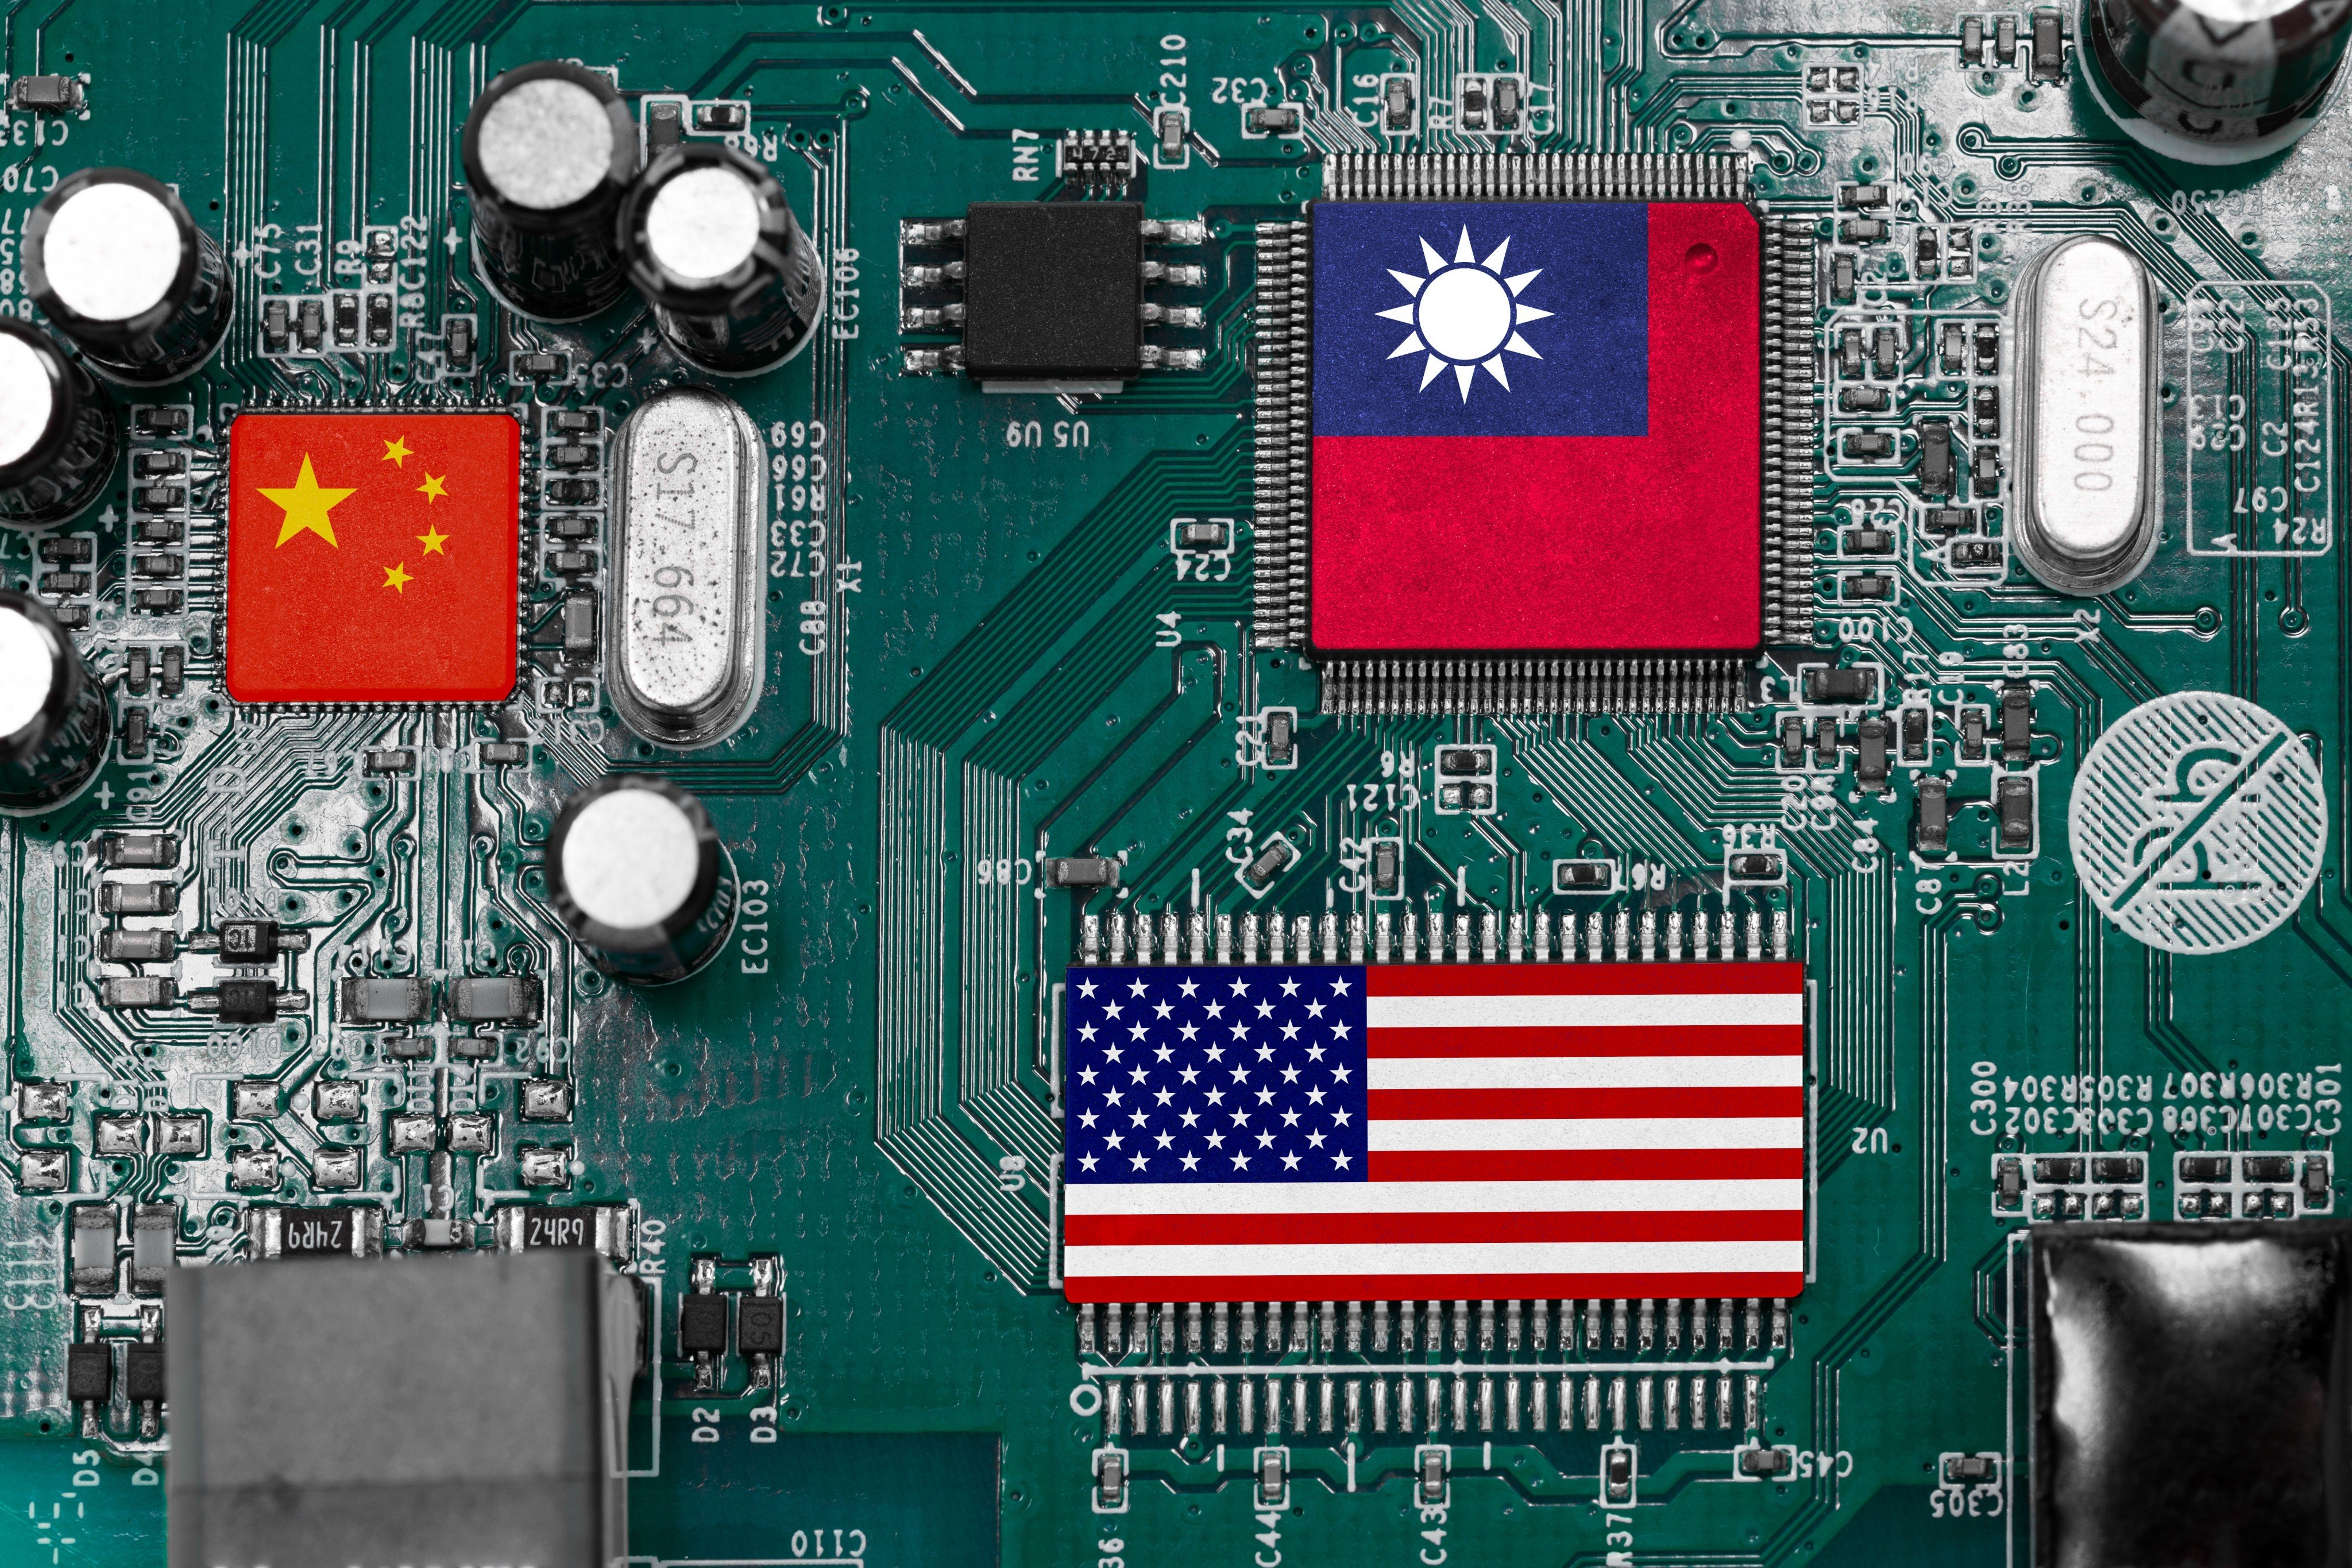 Taiwan produces about 90 per cent of the world’s most advanced chips, which some in the US regard as a security risk in the event of an invasion. Photo: Shutterstock